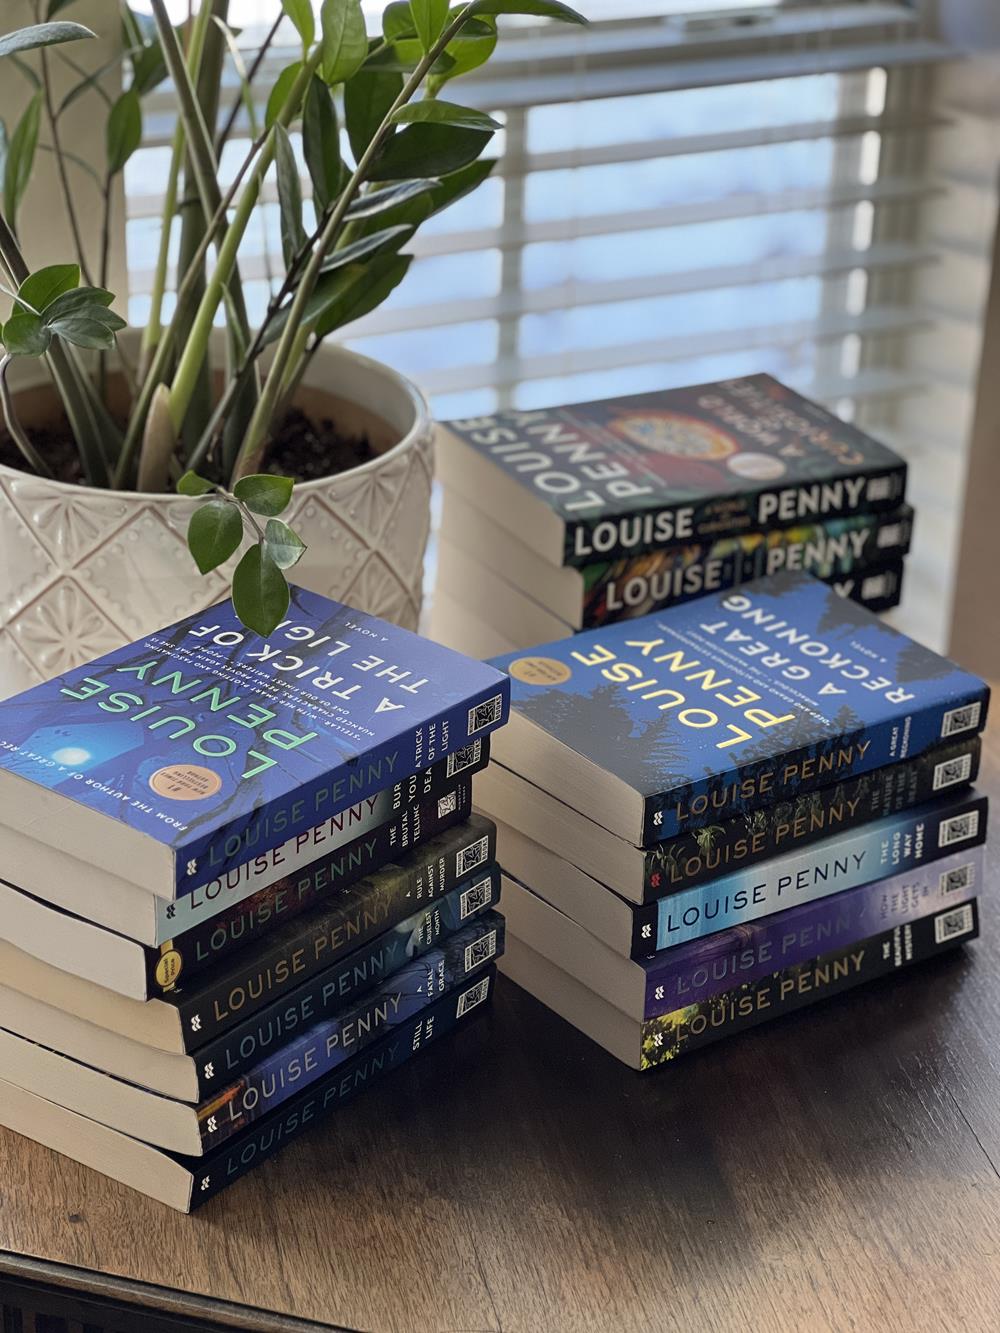 Louise Penny Inspector Gamache series